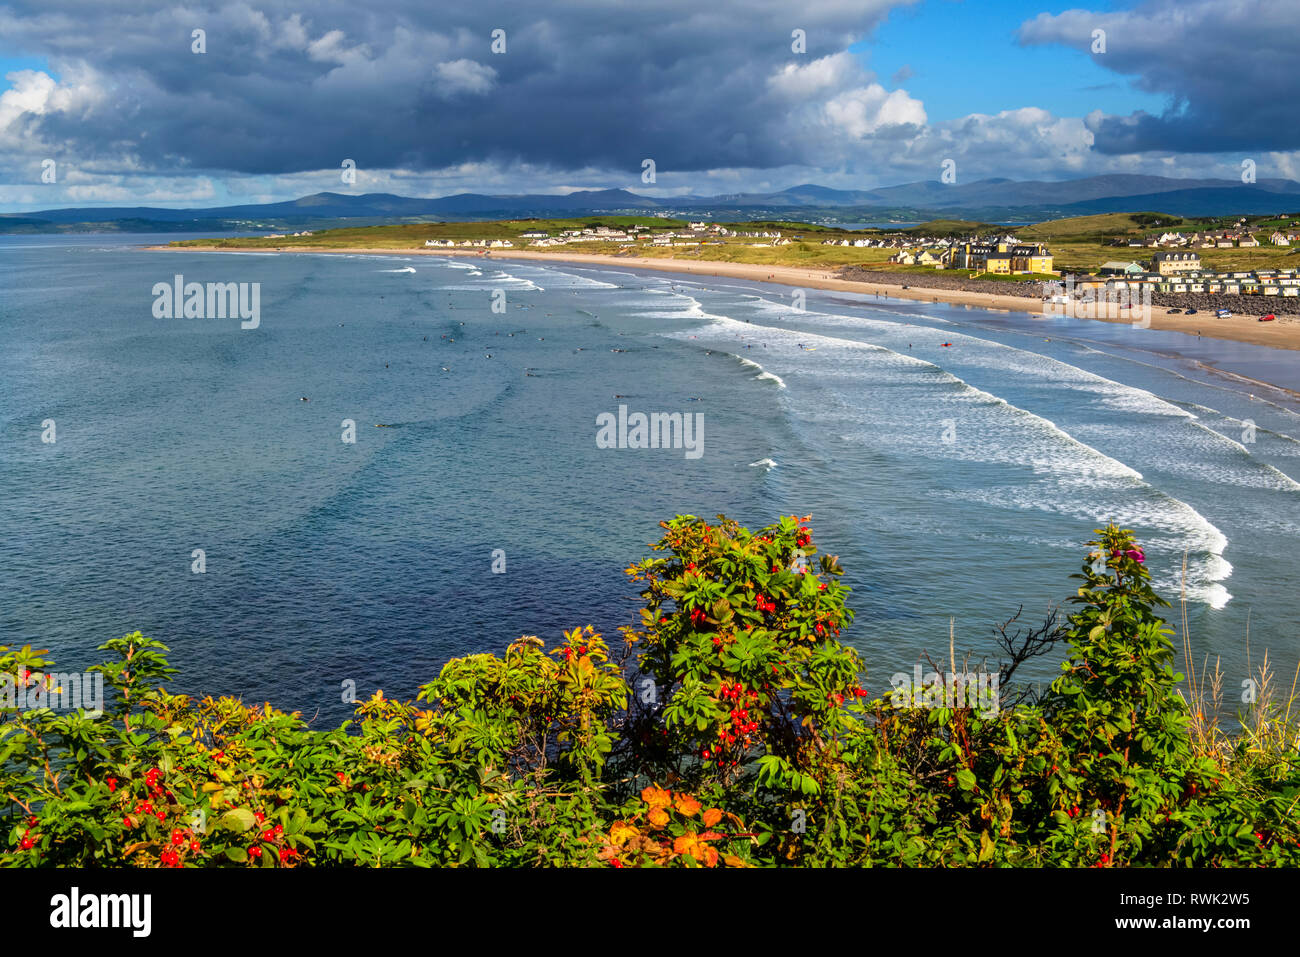 Surfing along the coast of Northern Ireland; Rossnowlagh, County Donegal, Ireland Stock Photo